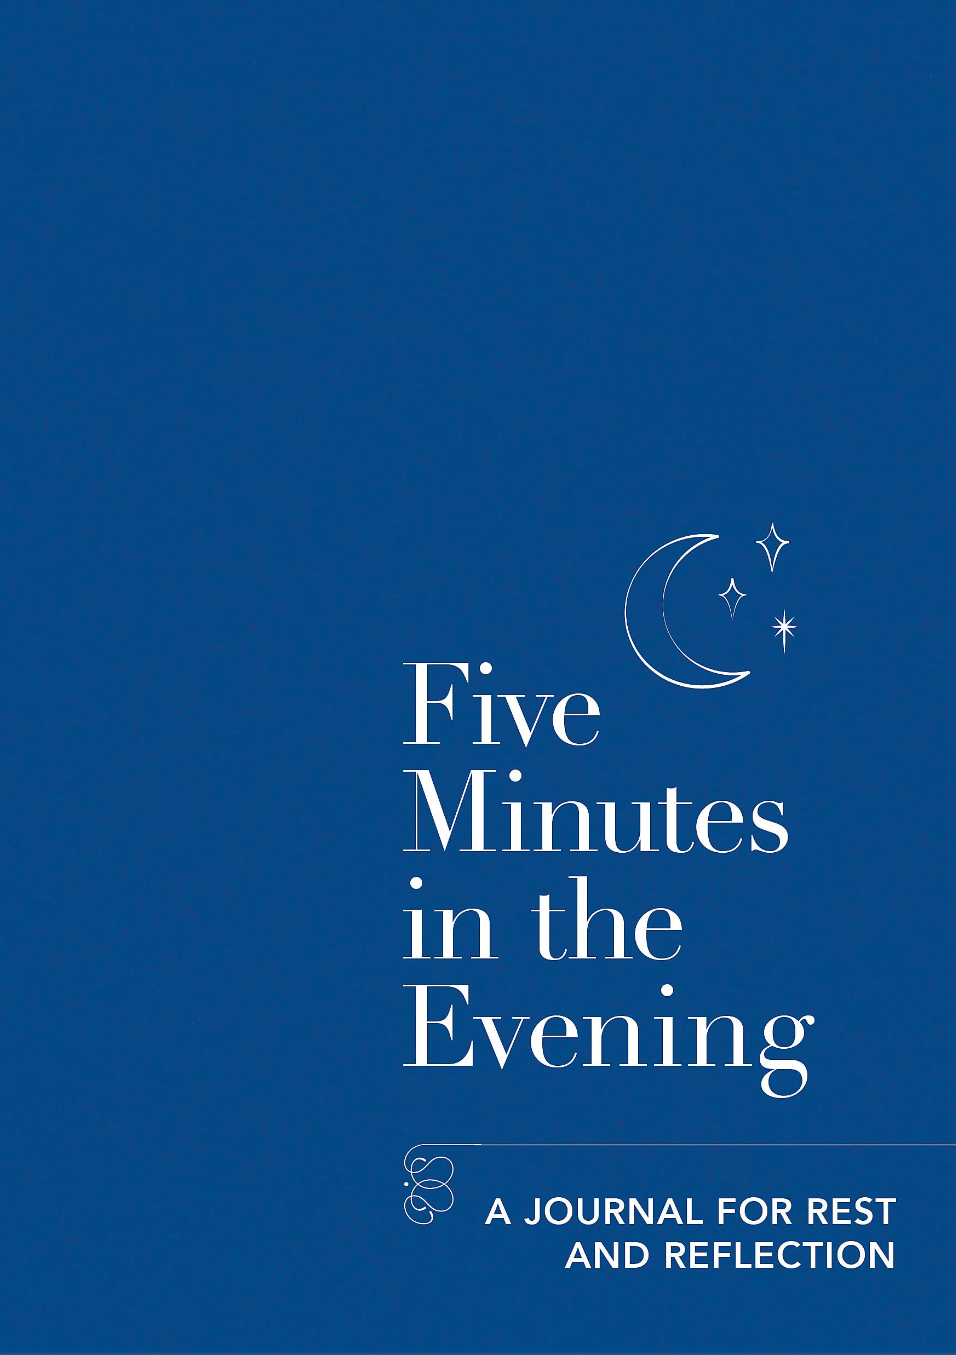 Five Minutes in the Evening: A Journal for Rest & Reflection